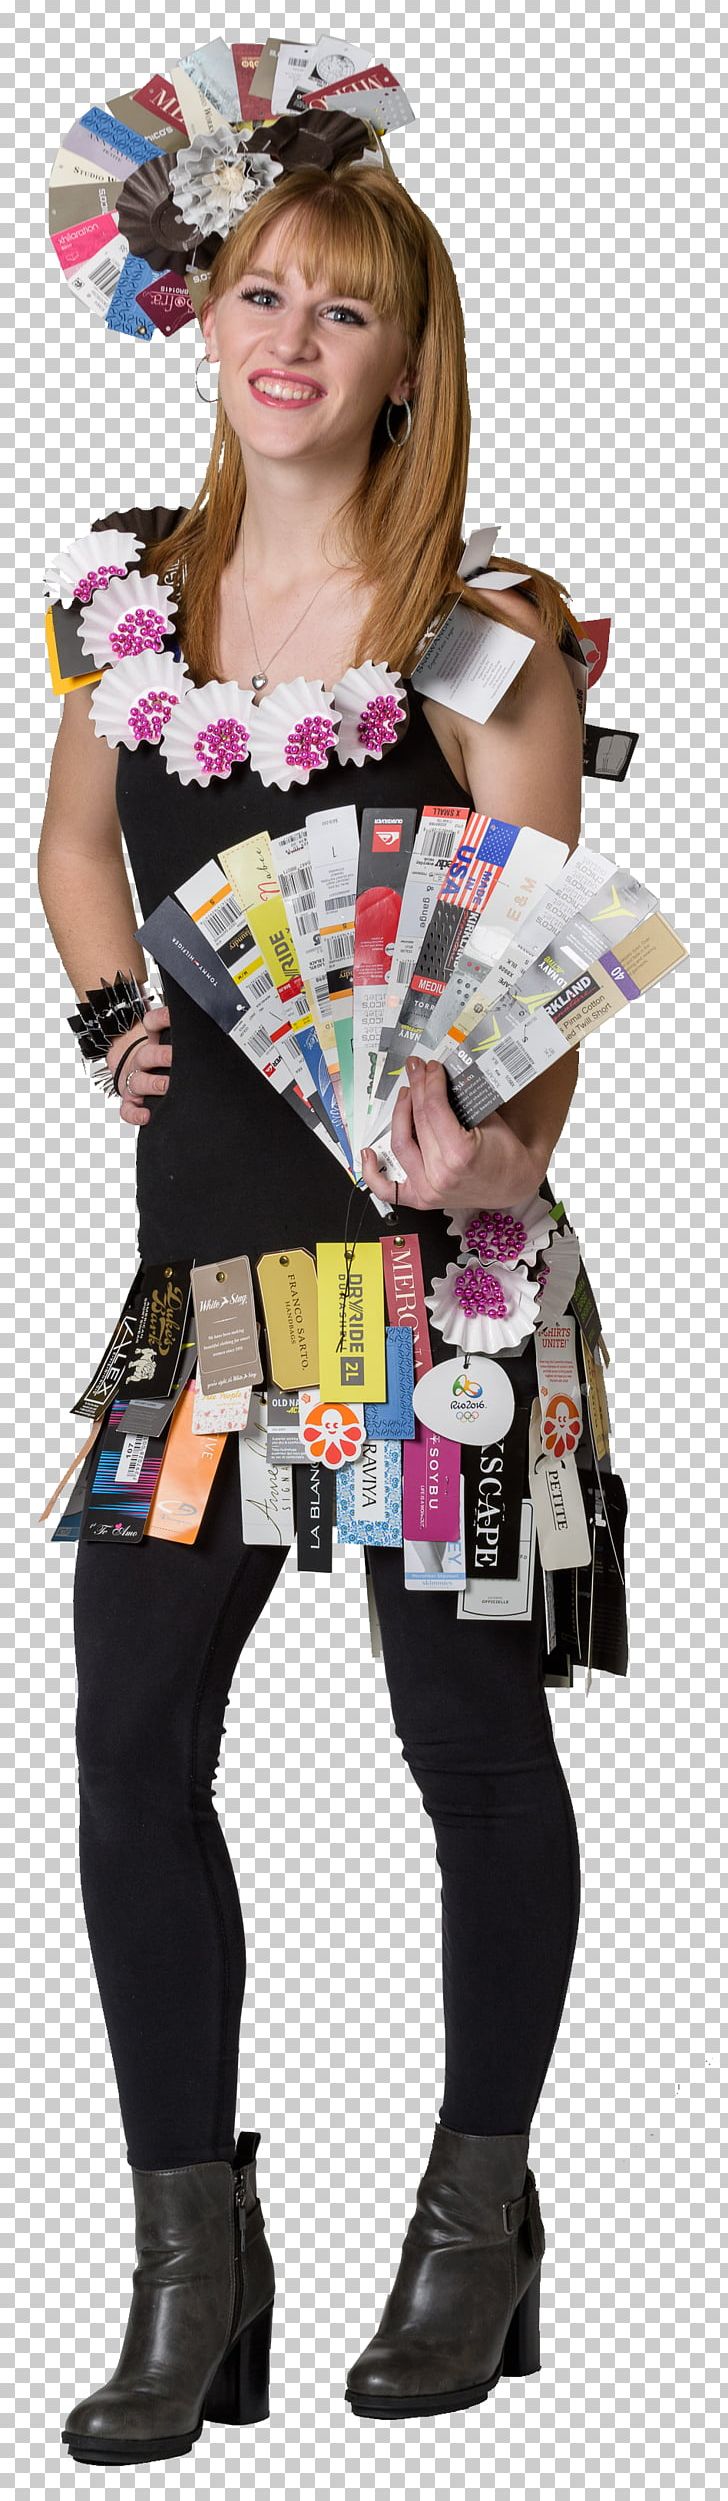 Fashion Costume Waste McAdams Wright Ragen Inc. SWANCC PNG, Clipart, Clothing, Cook County Illinois, Costume, Fashion, Fashion Runway Free PNG Download